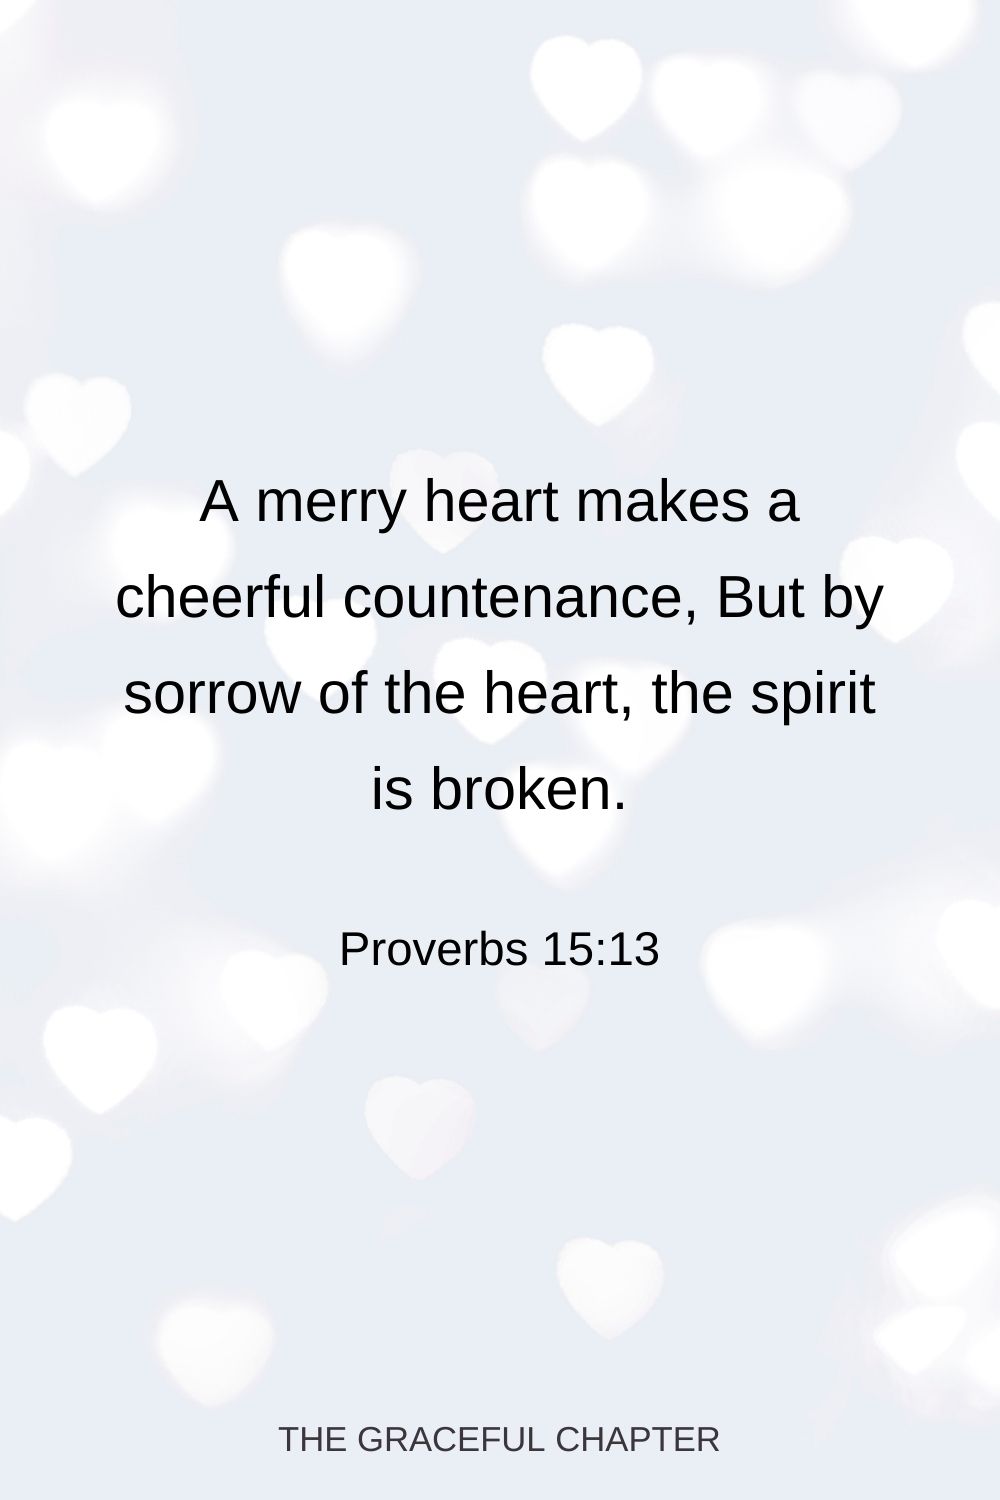 A merry heart makes a cheerful countenance, But by sorrow of the heart the spirit is broken. Proverbs 15:13